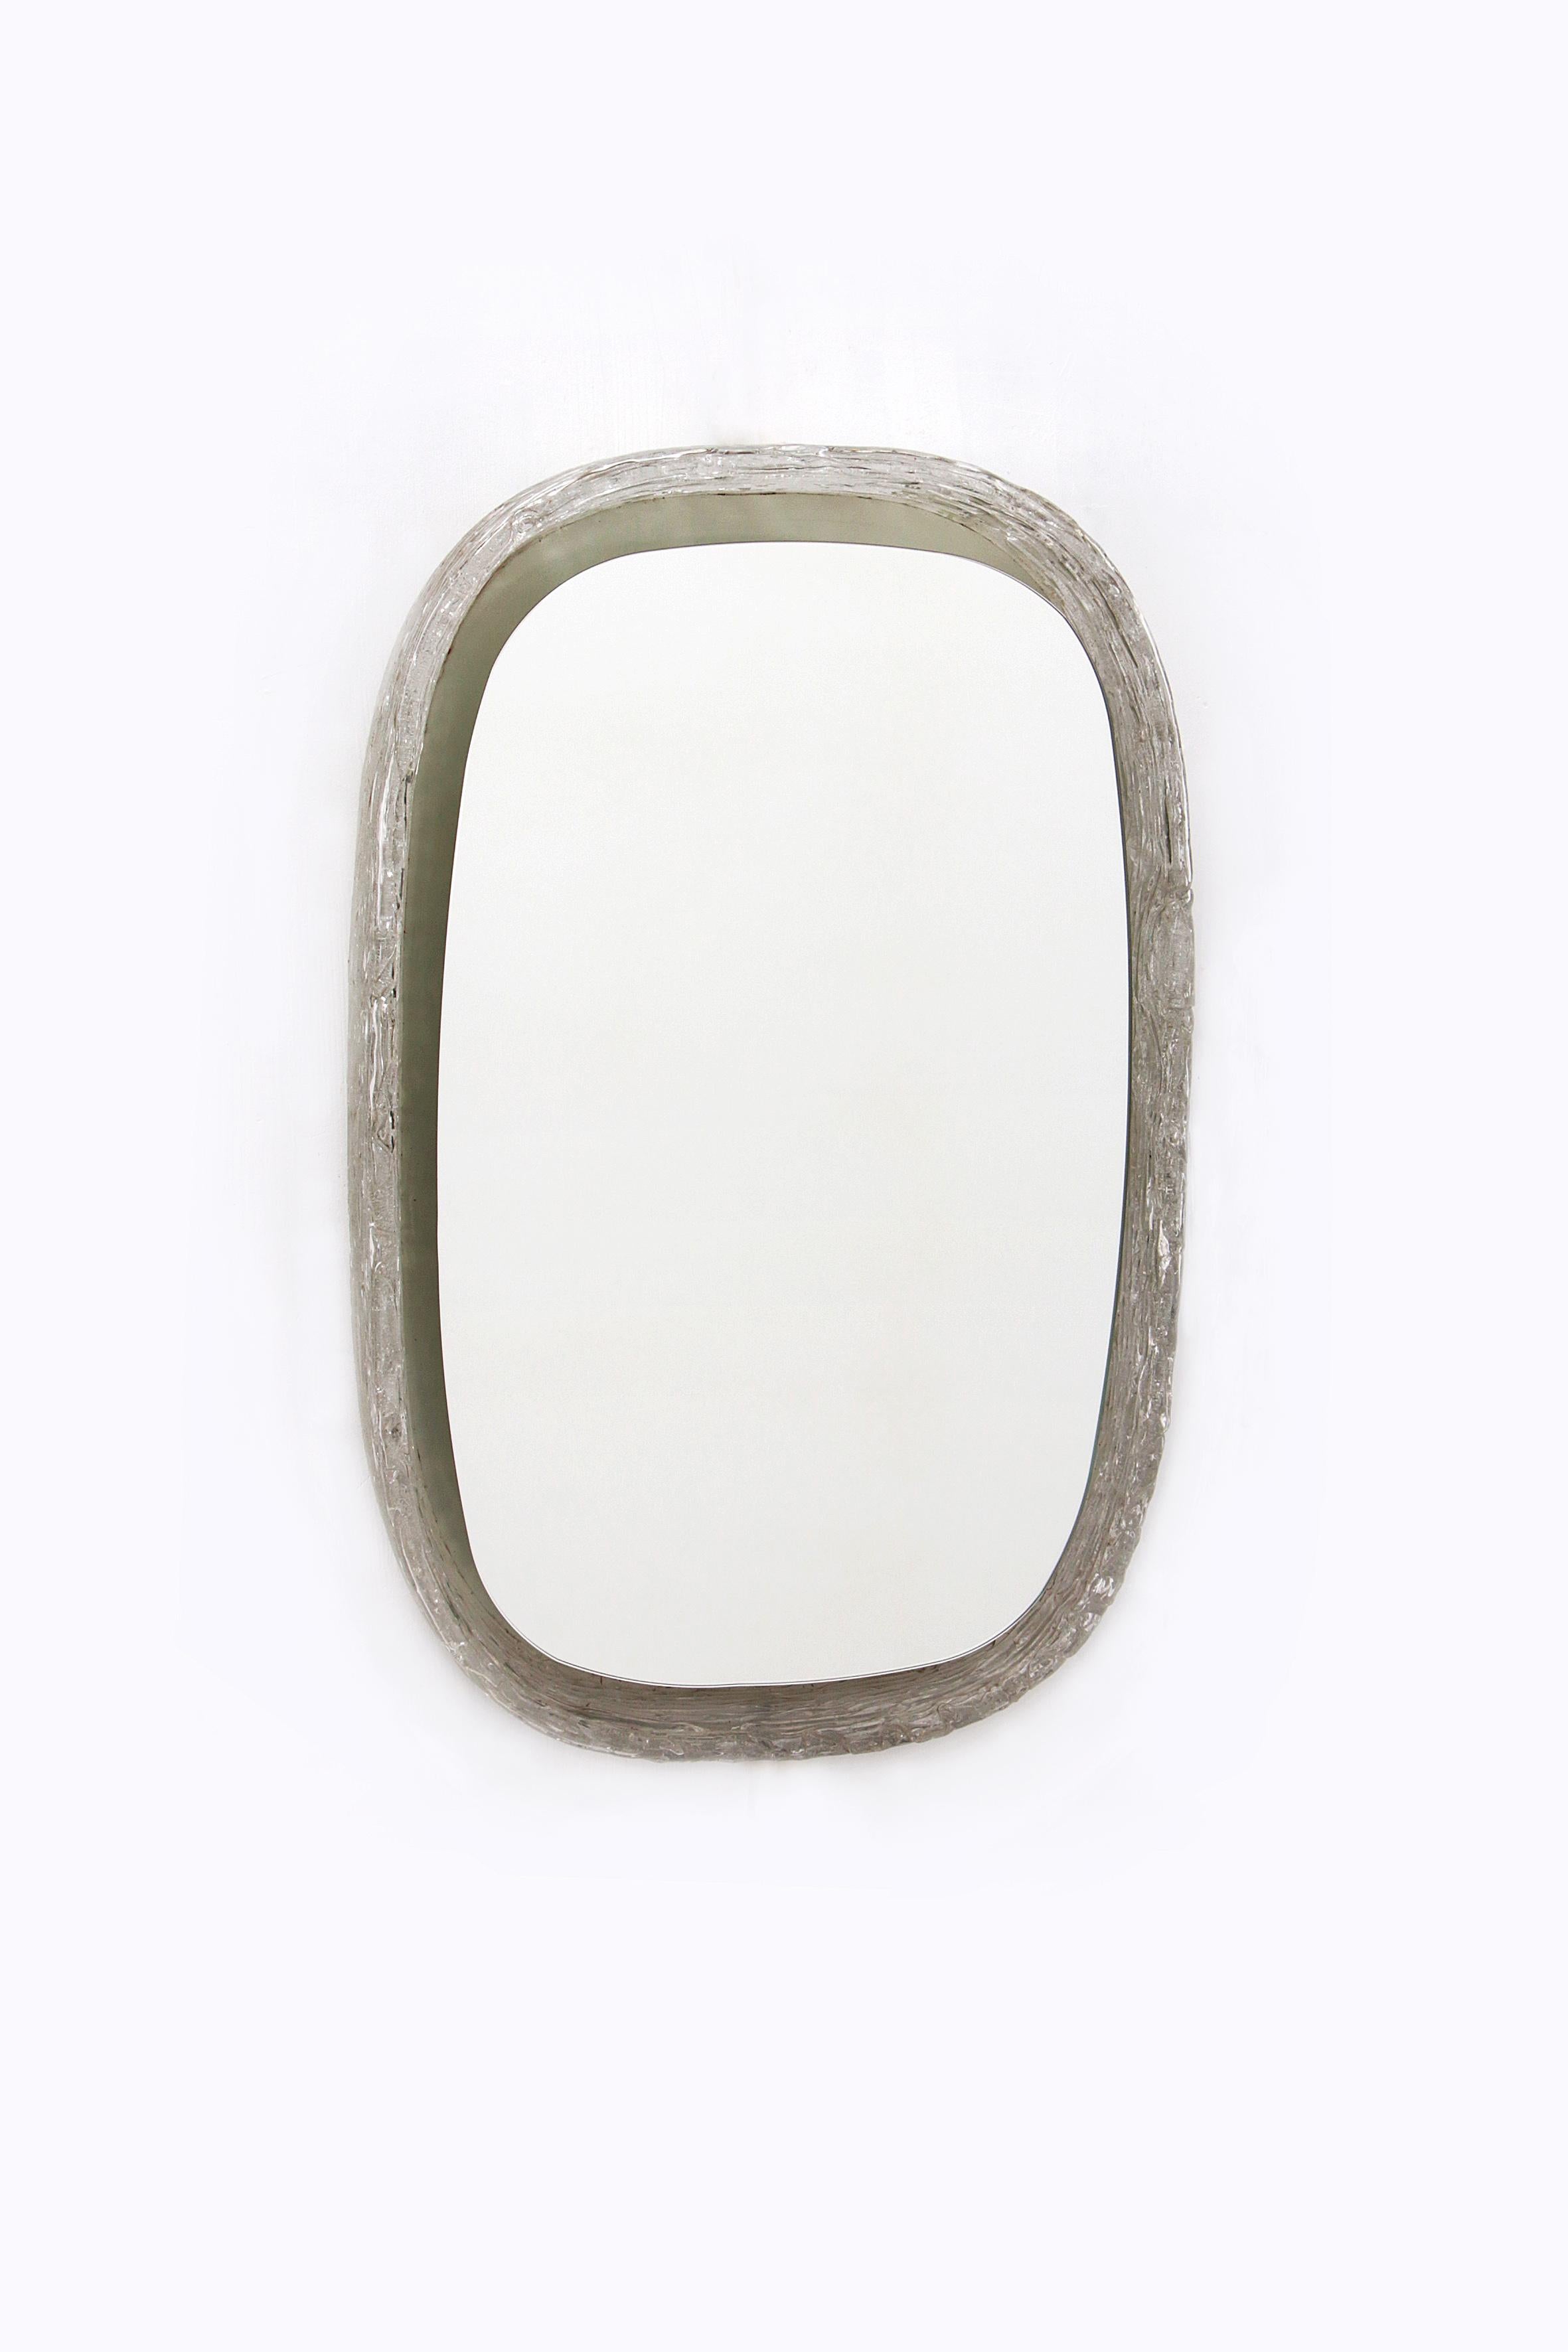 Hillebrand Vintage Oval Illuminated Wall Mirror Plexiglass 1960s Germany

The beautiful mirror from Hillebrand is made of metal with plexiglass and was produced in the 1960s.

This is an oval model with beautiful lighting.

The shape used in this